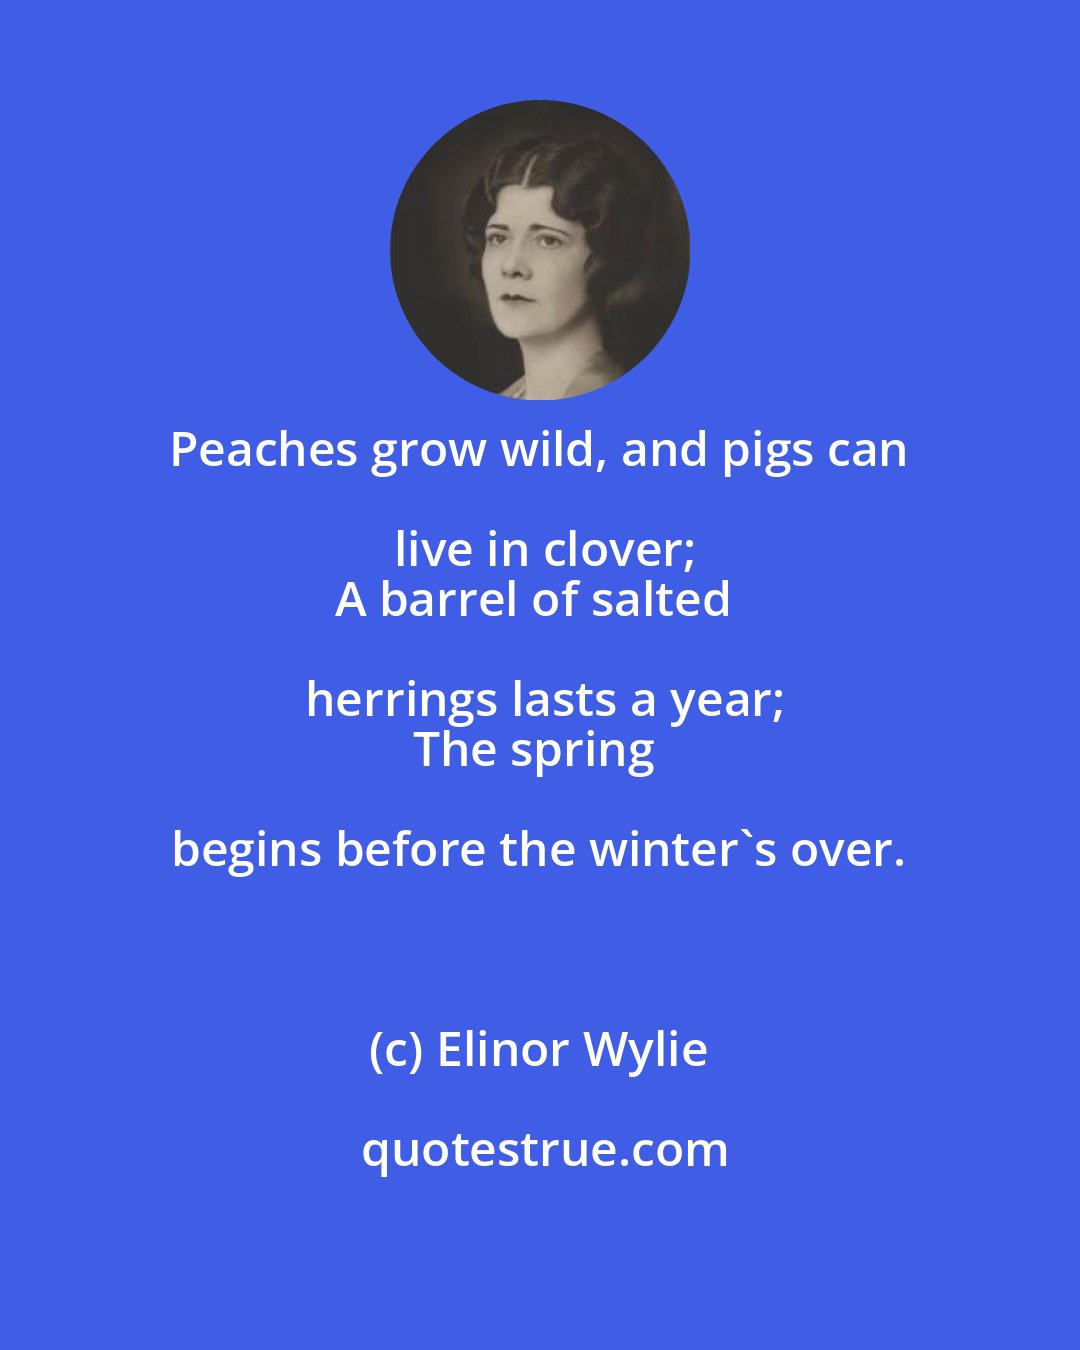 Elinor Wylie: Peaches grow wild, and pigs can live in clover;
A barrel of salted herrings lasts a year;
The spring begins before the winter's over.